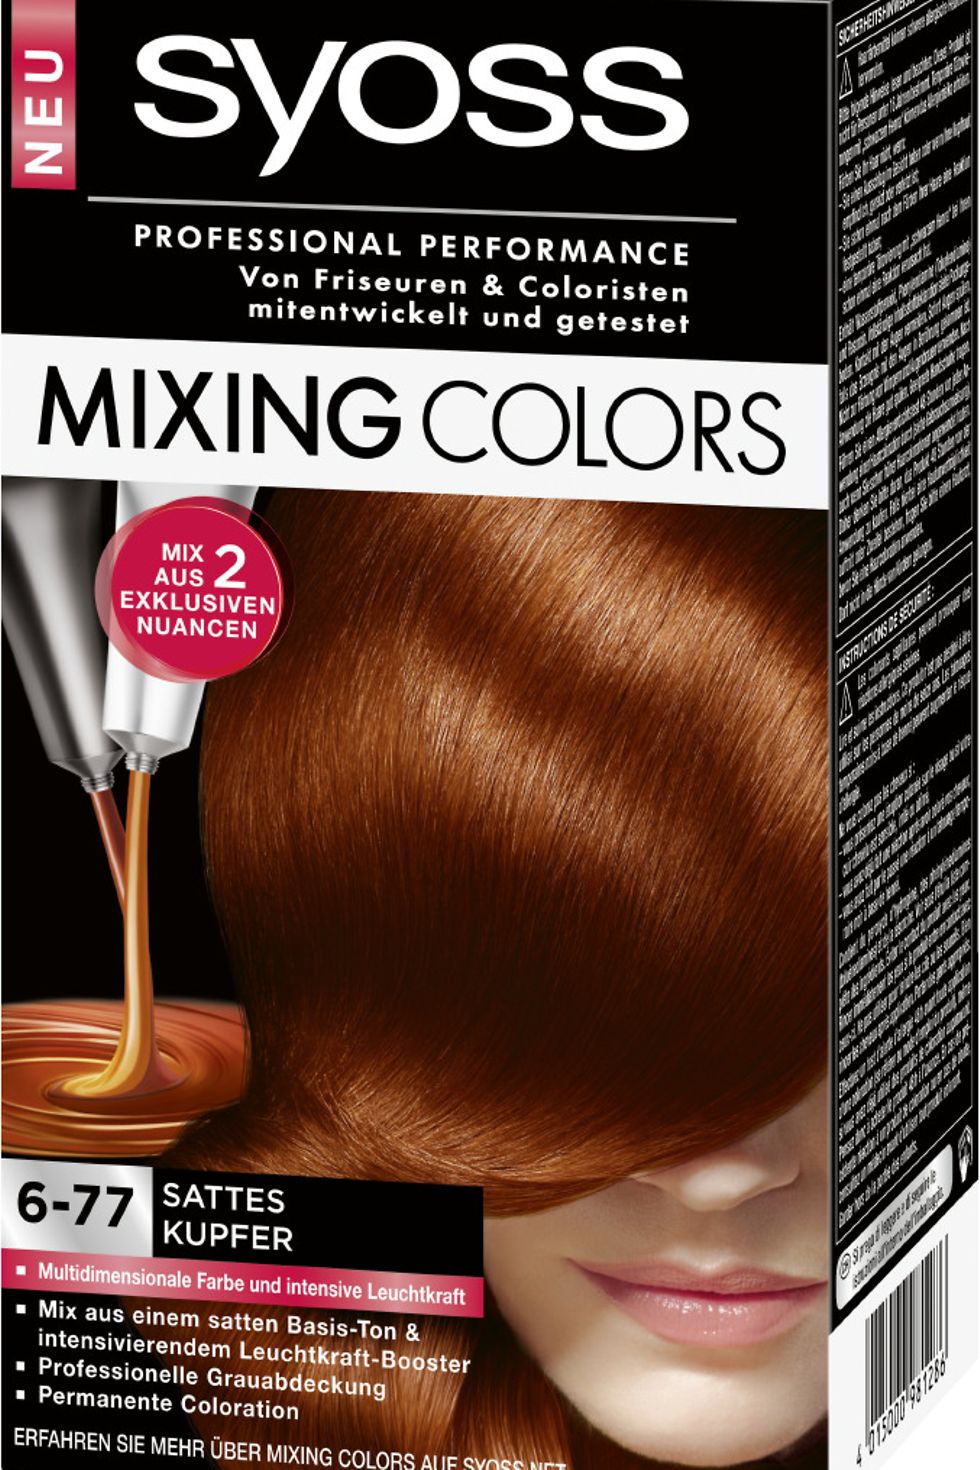 Syoss Mixing Colors 6-77 Sattes Kupfer